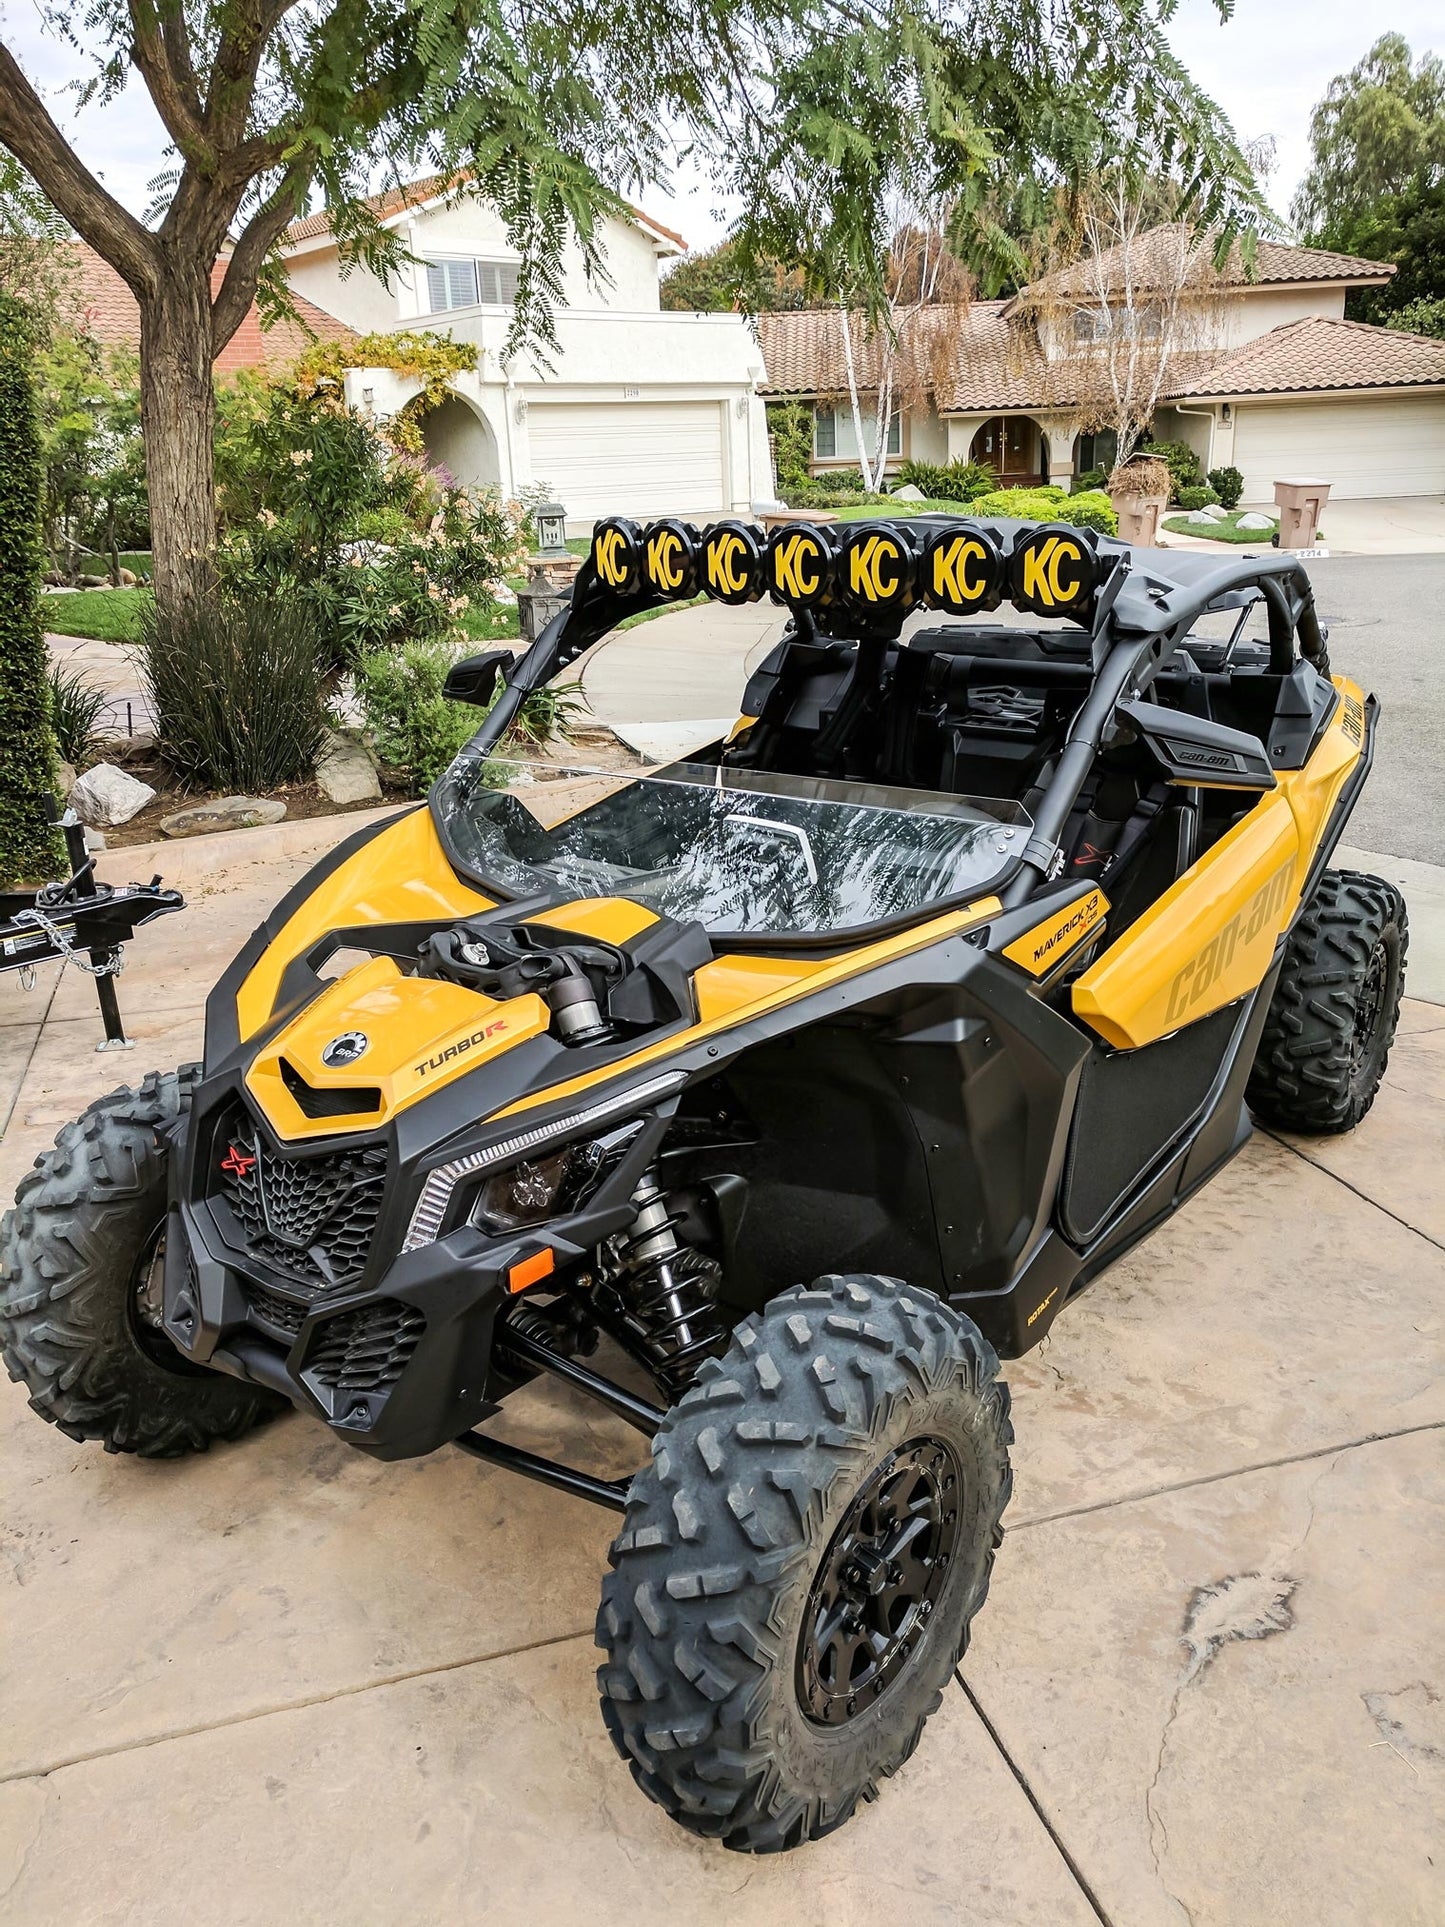 KC HiLiTES 45 in Pro6 Gravity LED -7-Light - Light Bar System - 140W Combo Beam - for 17-19 Can-Am Maverick X3 91334